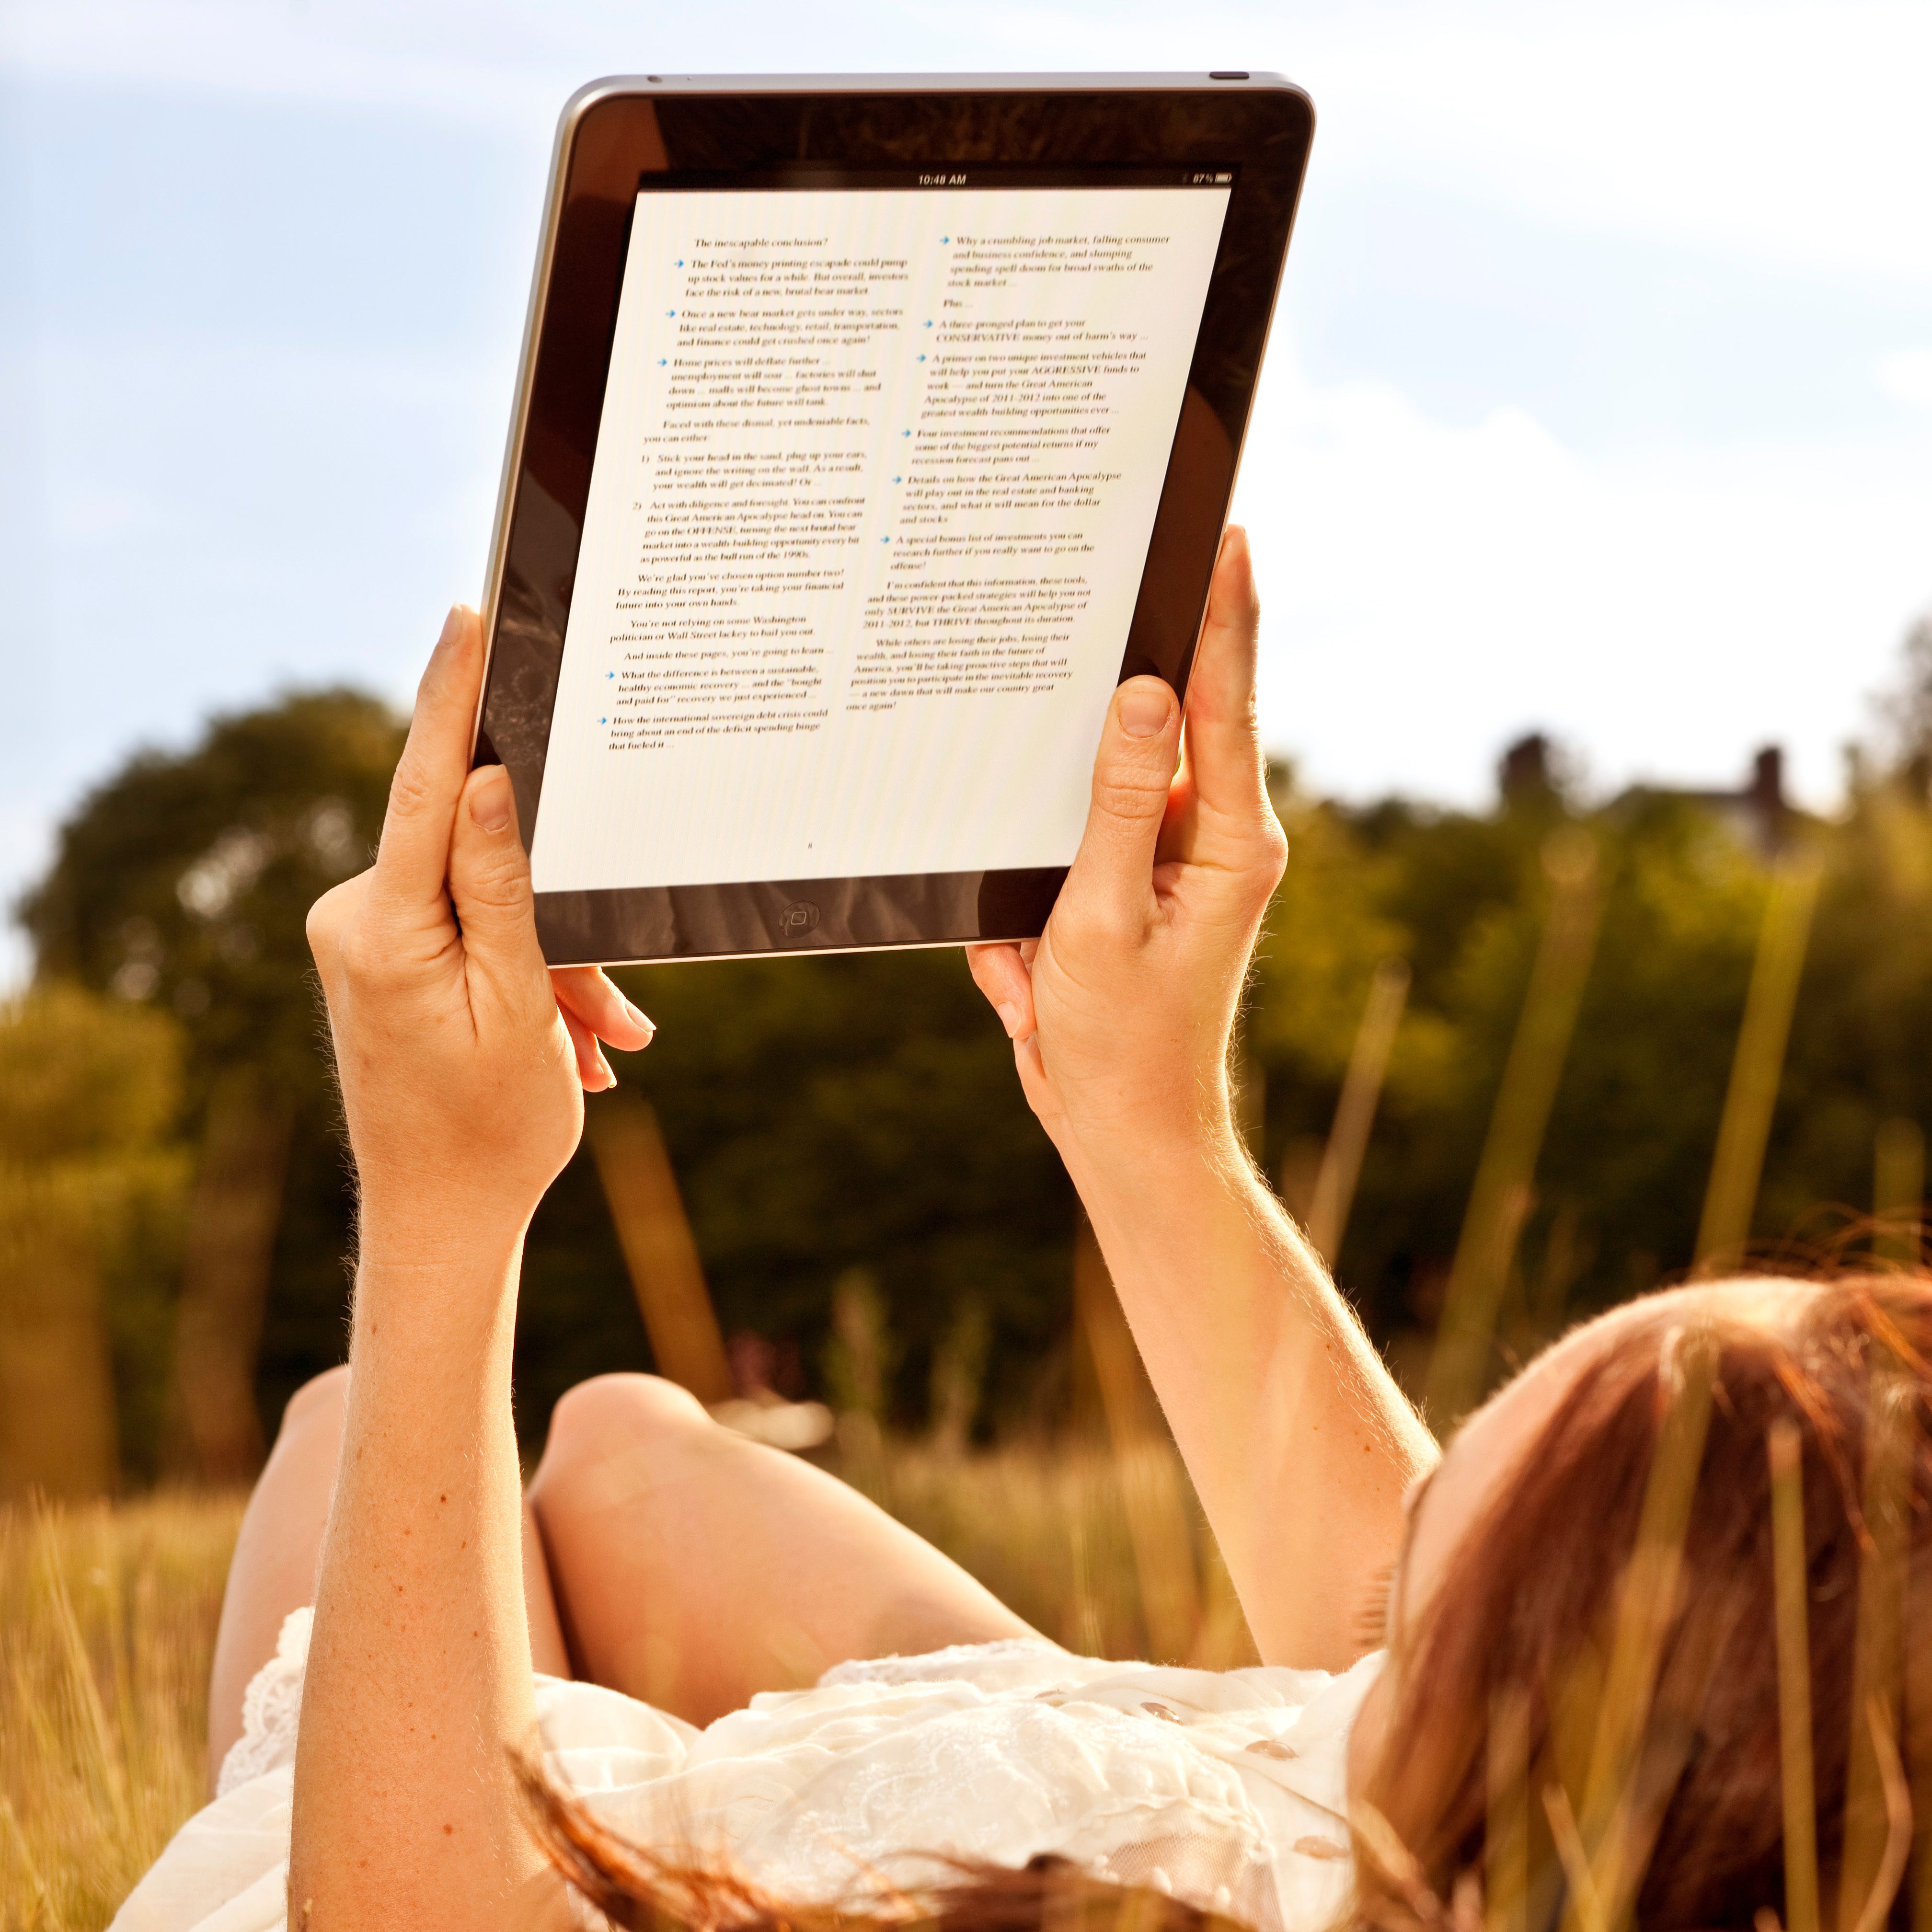 5 Amazon Prime benefits for book lovers